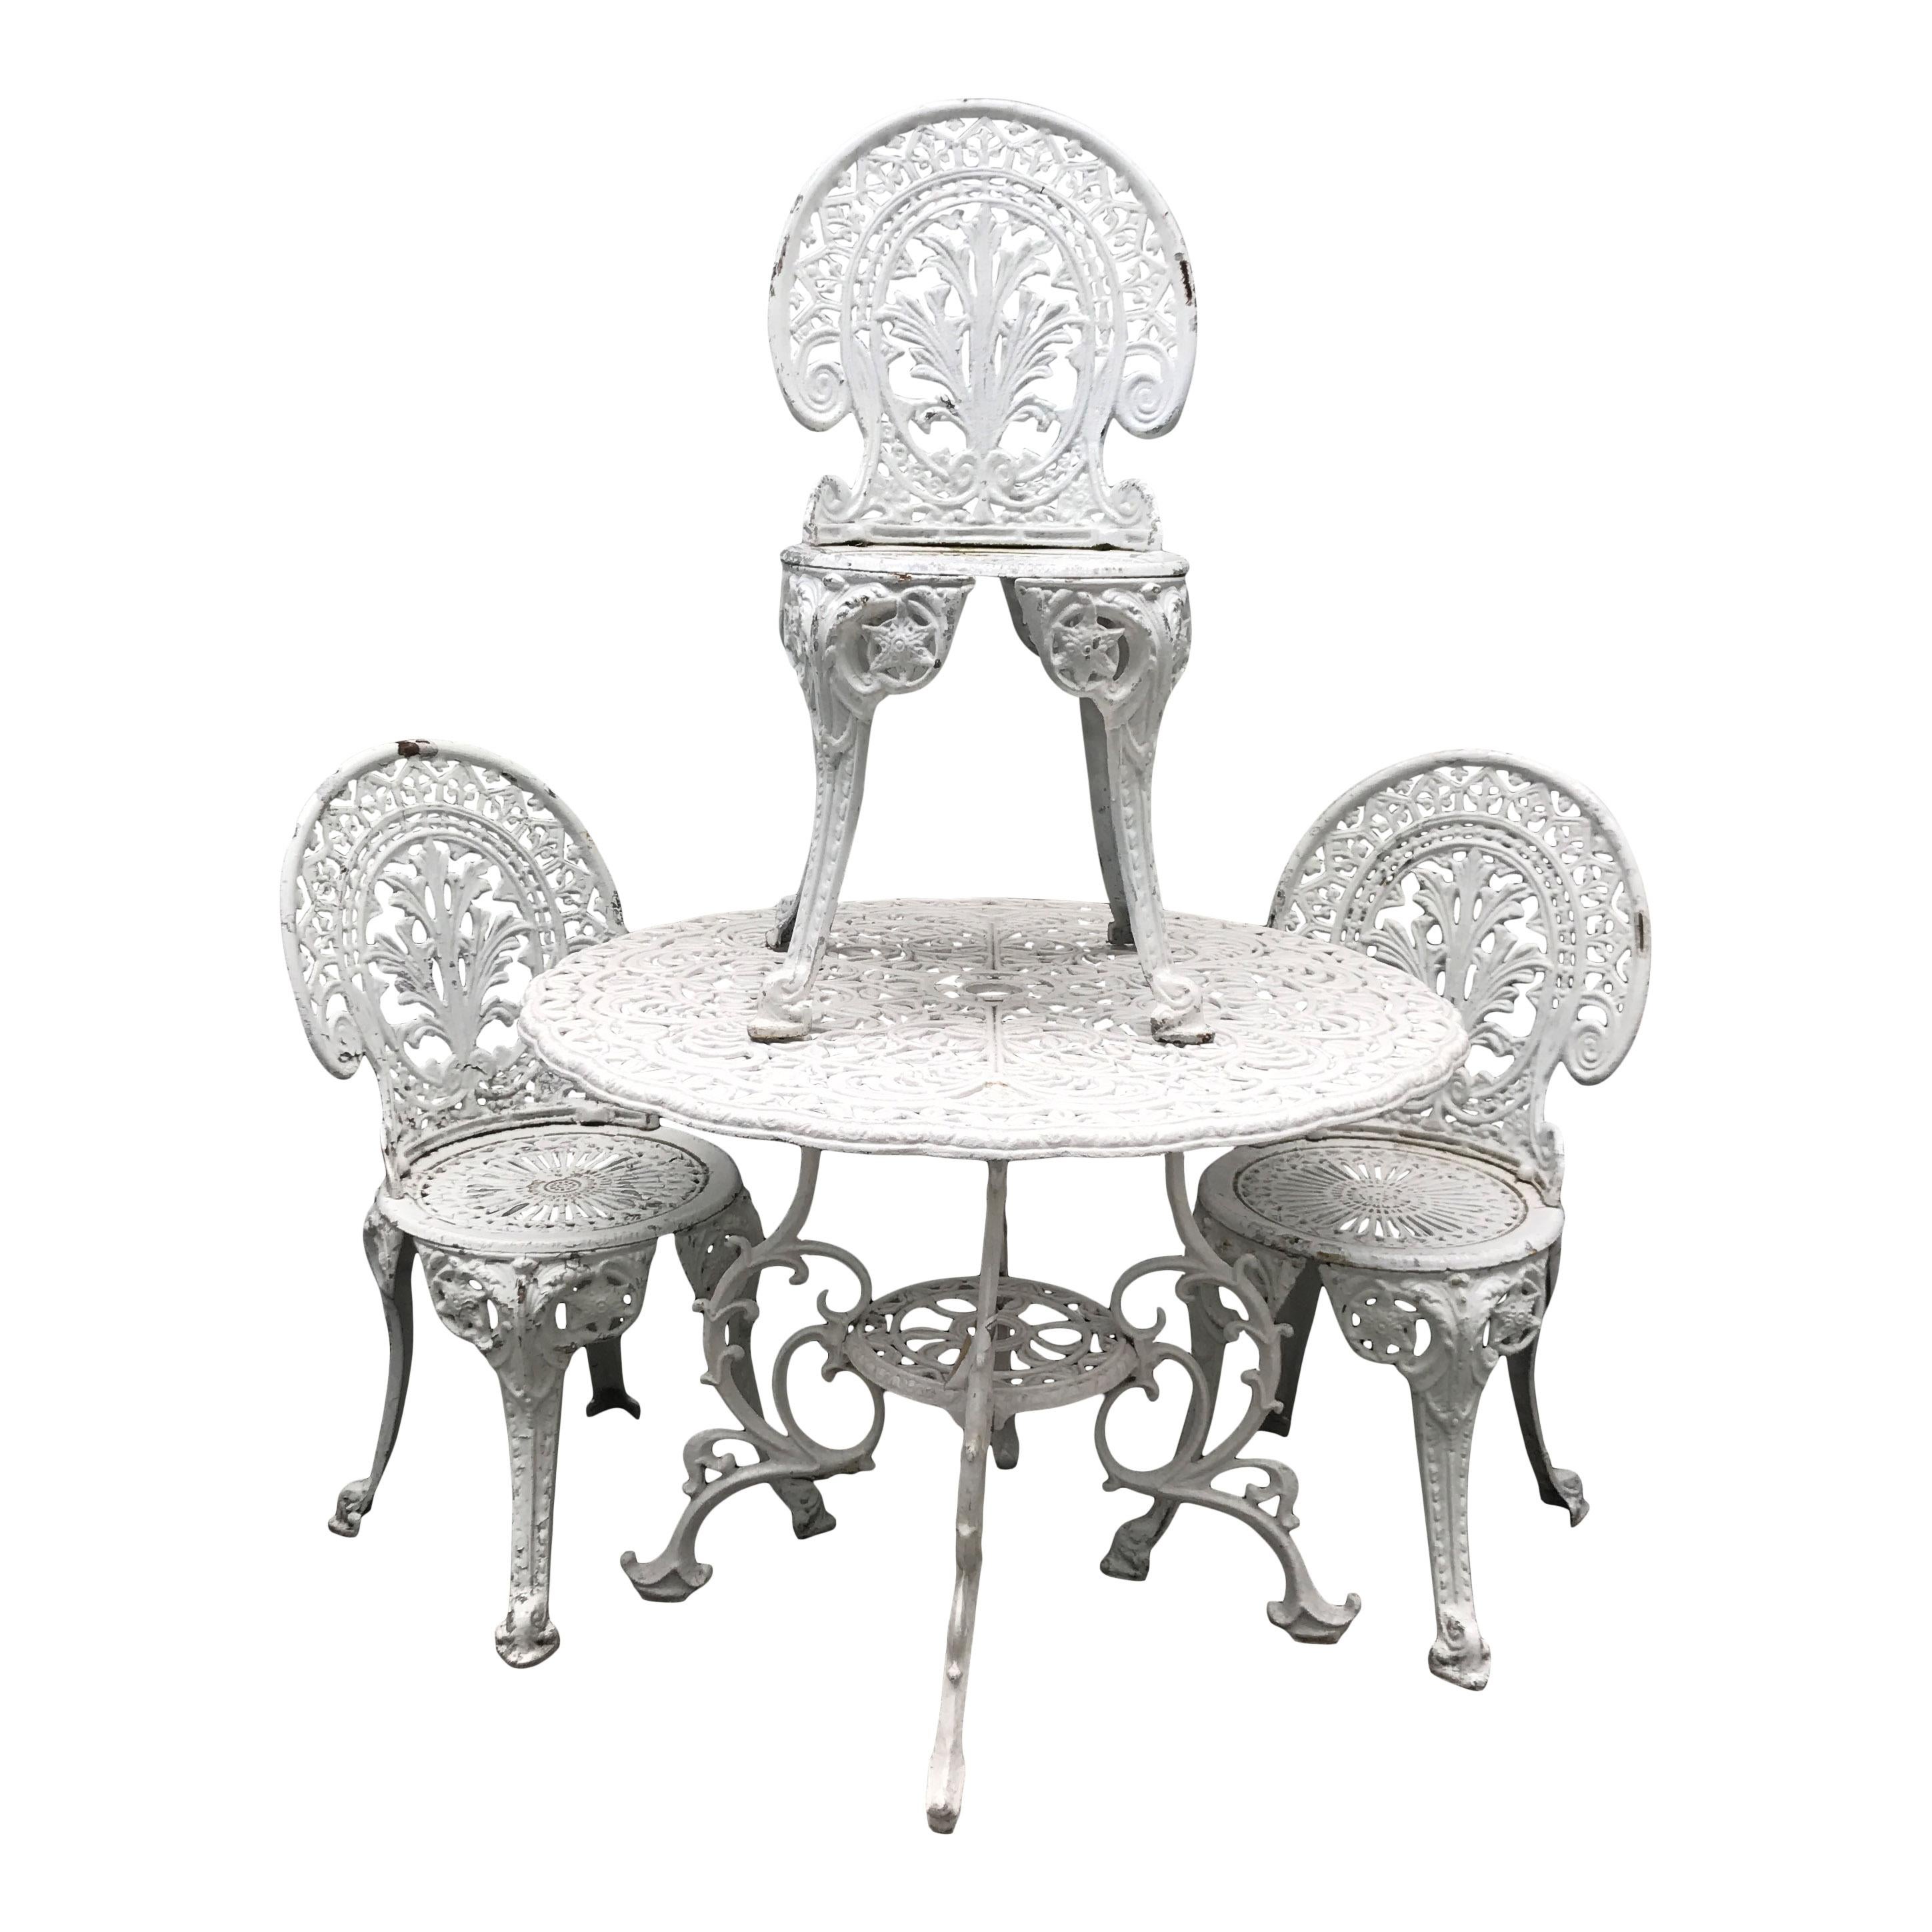 European Late 20th Century Metal Garden Table with Cast Iron Chairs